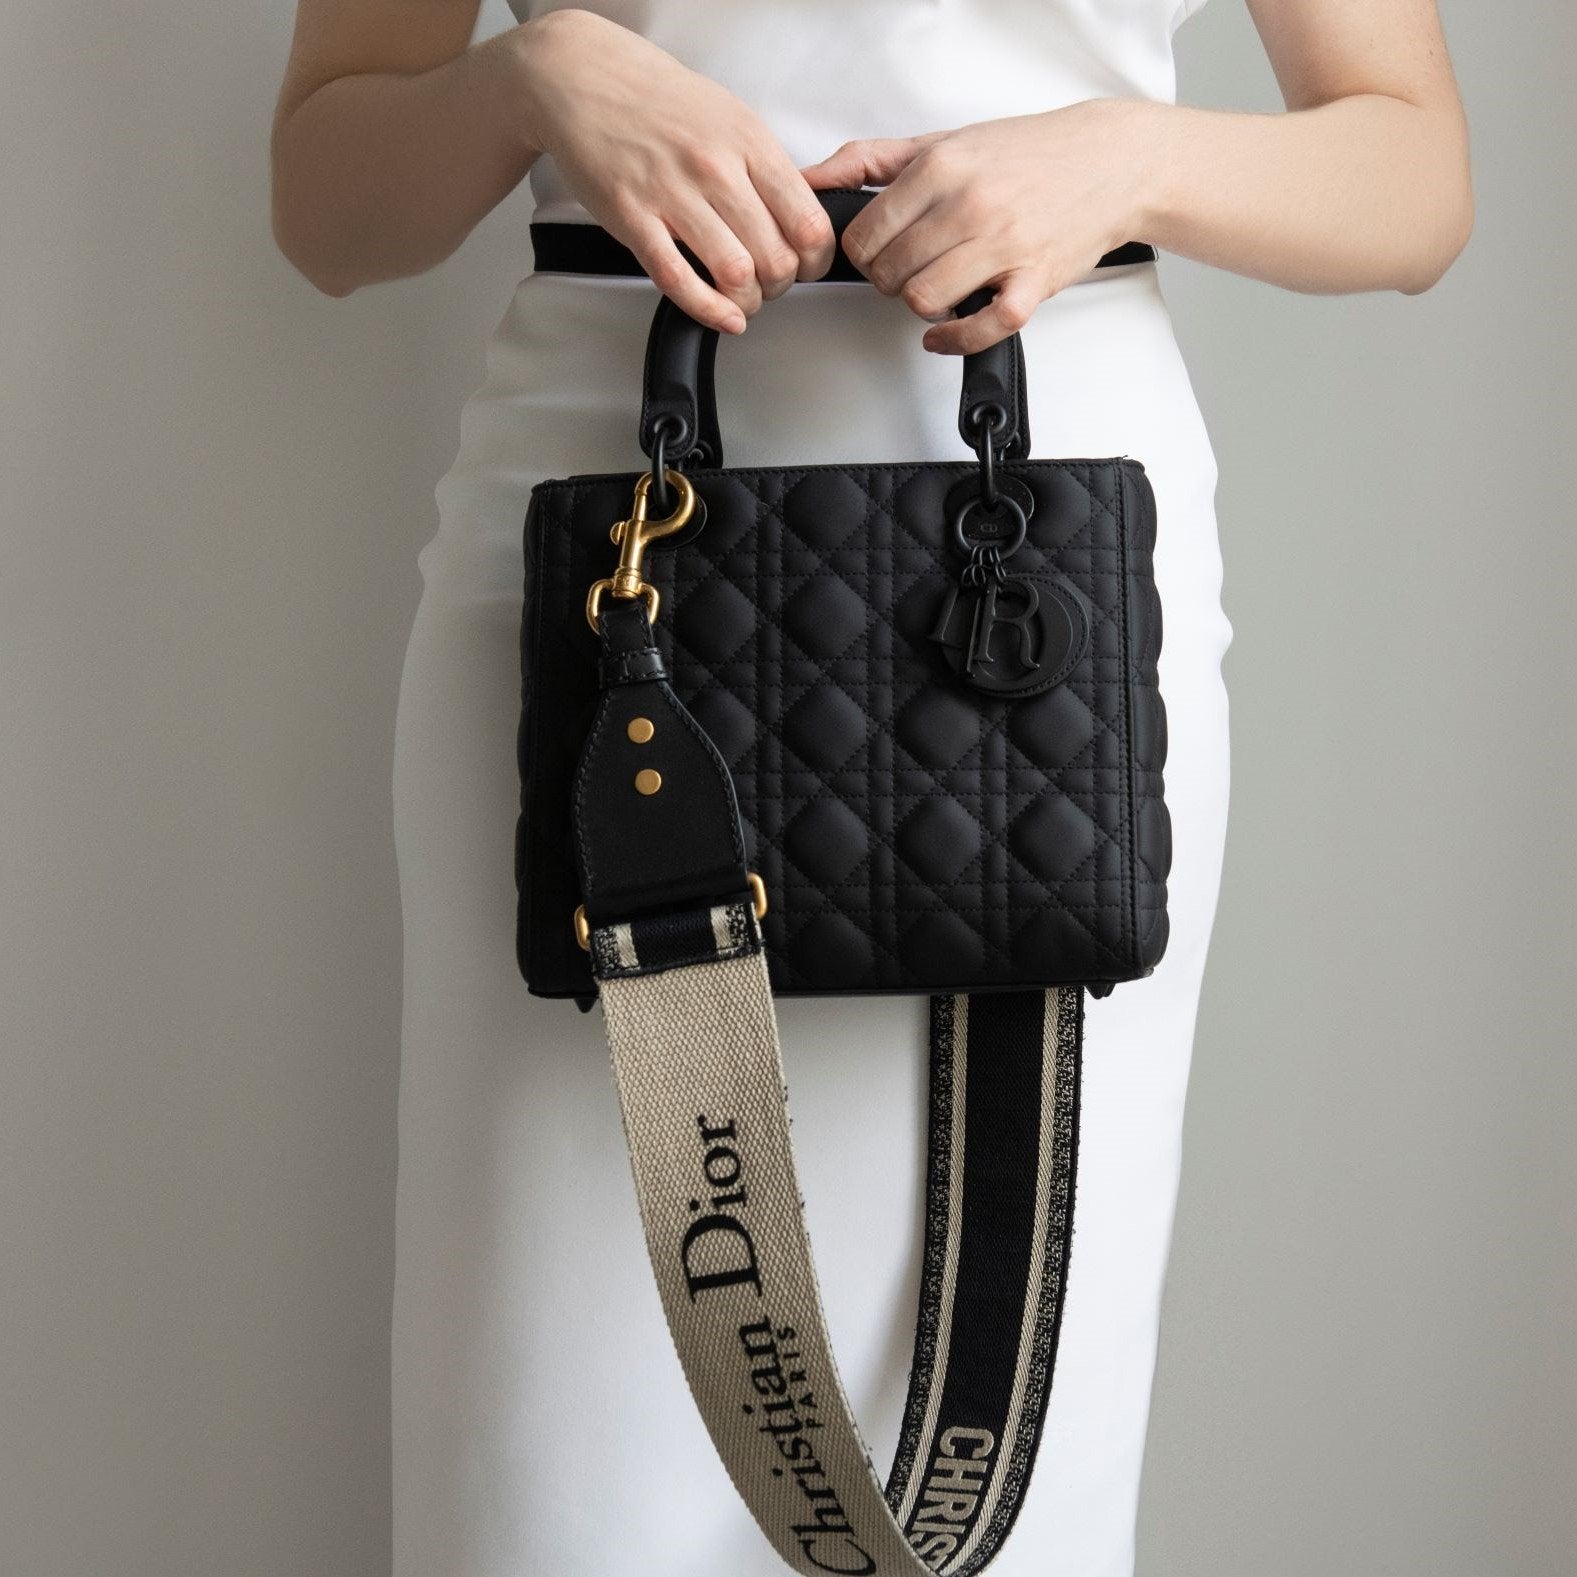 How To Dress Up Your Bag: The Best Designer Bag Accessories – Bagaholic